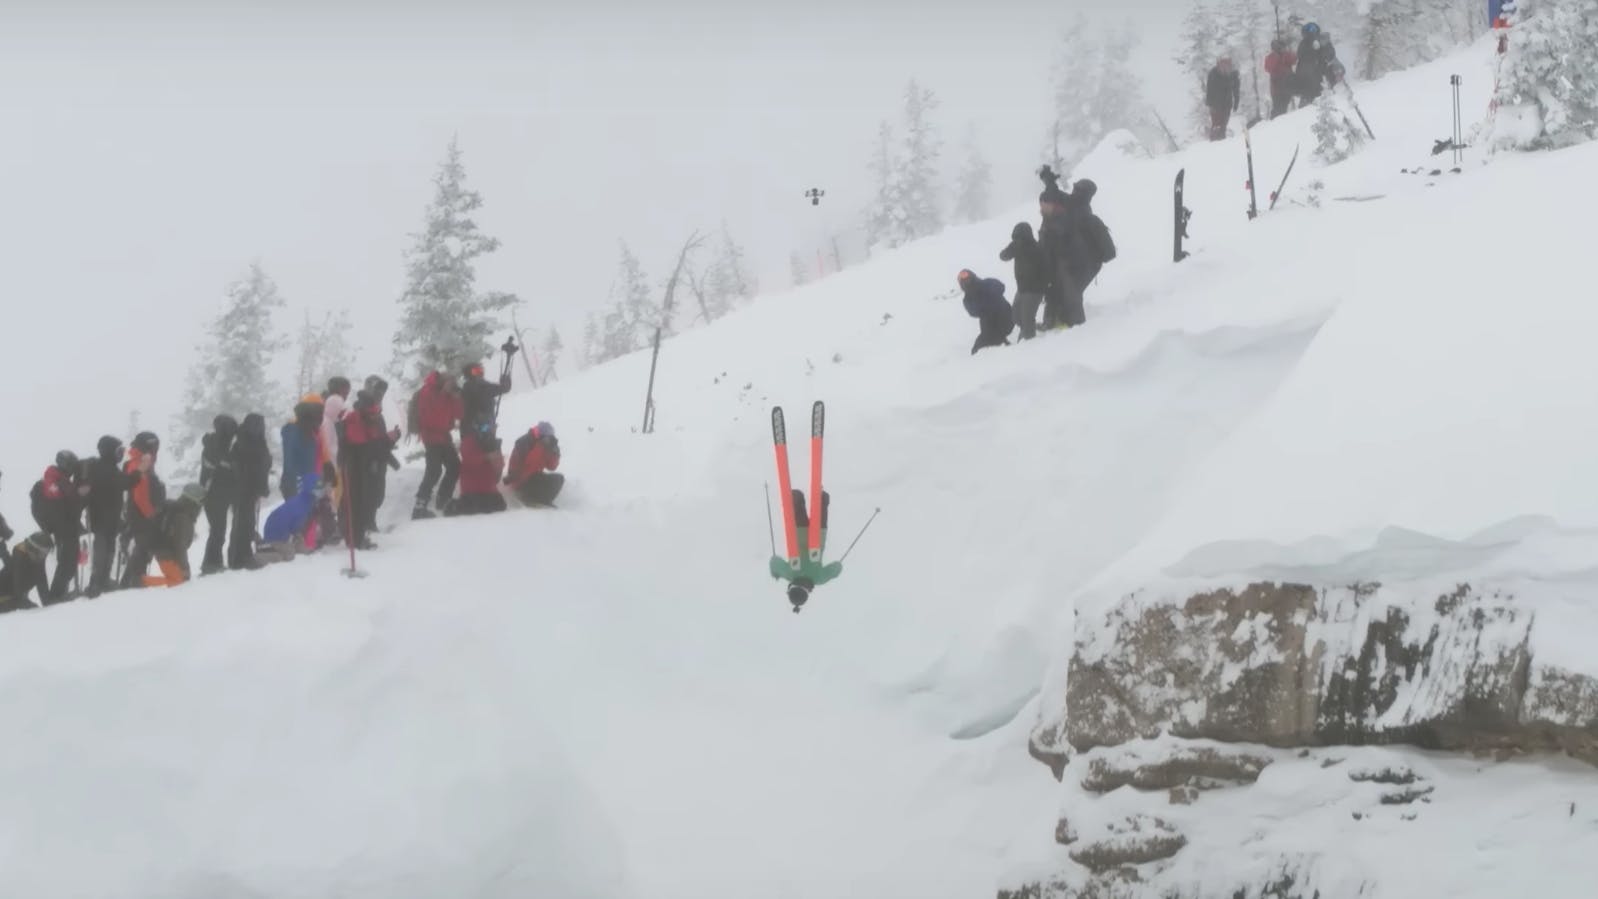 A skier drops into Corbet's coulier upside down for Kings and Queens of Corbet's. Photo comes from screenshot of Jackson Hole Mountain Resort's YouTube video "KINGS & QUEENS: MIND-BLOWING MOMENTS."